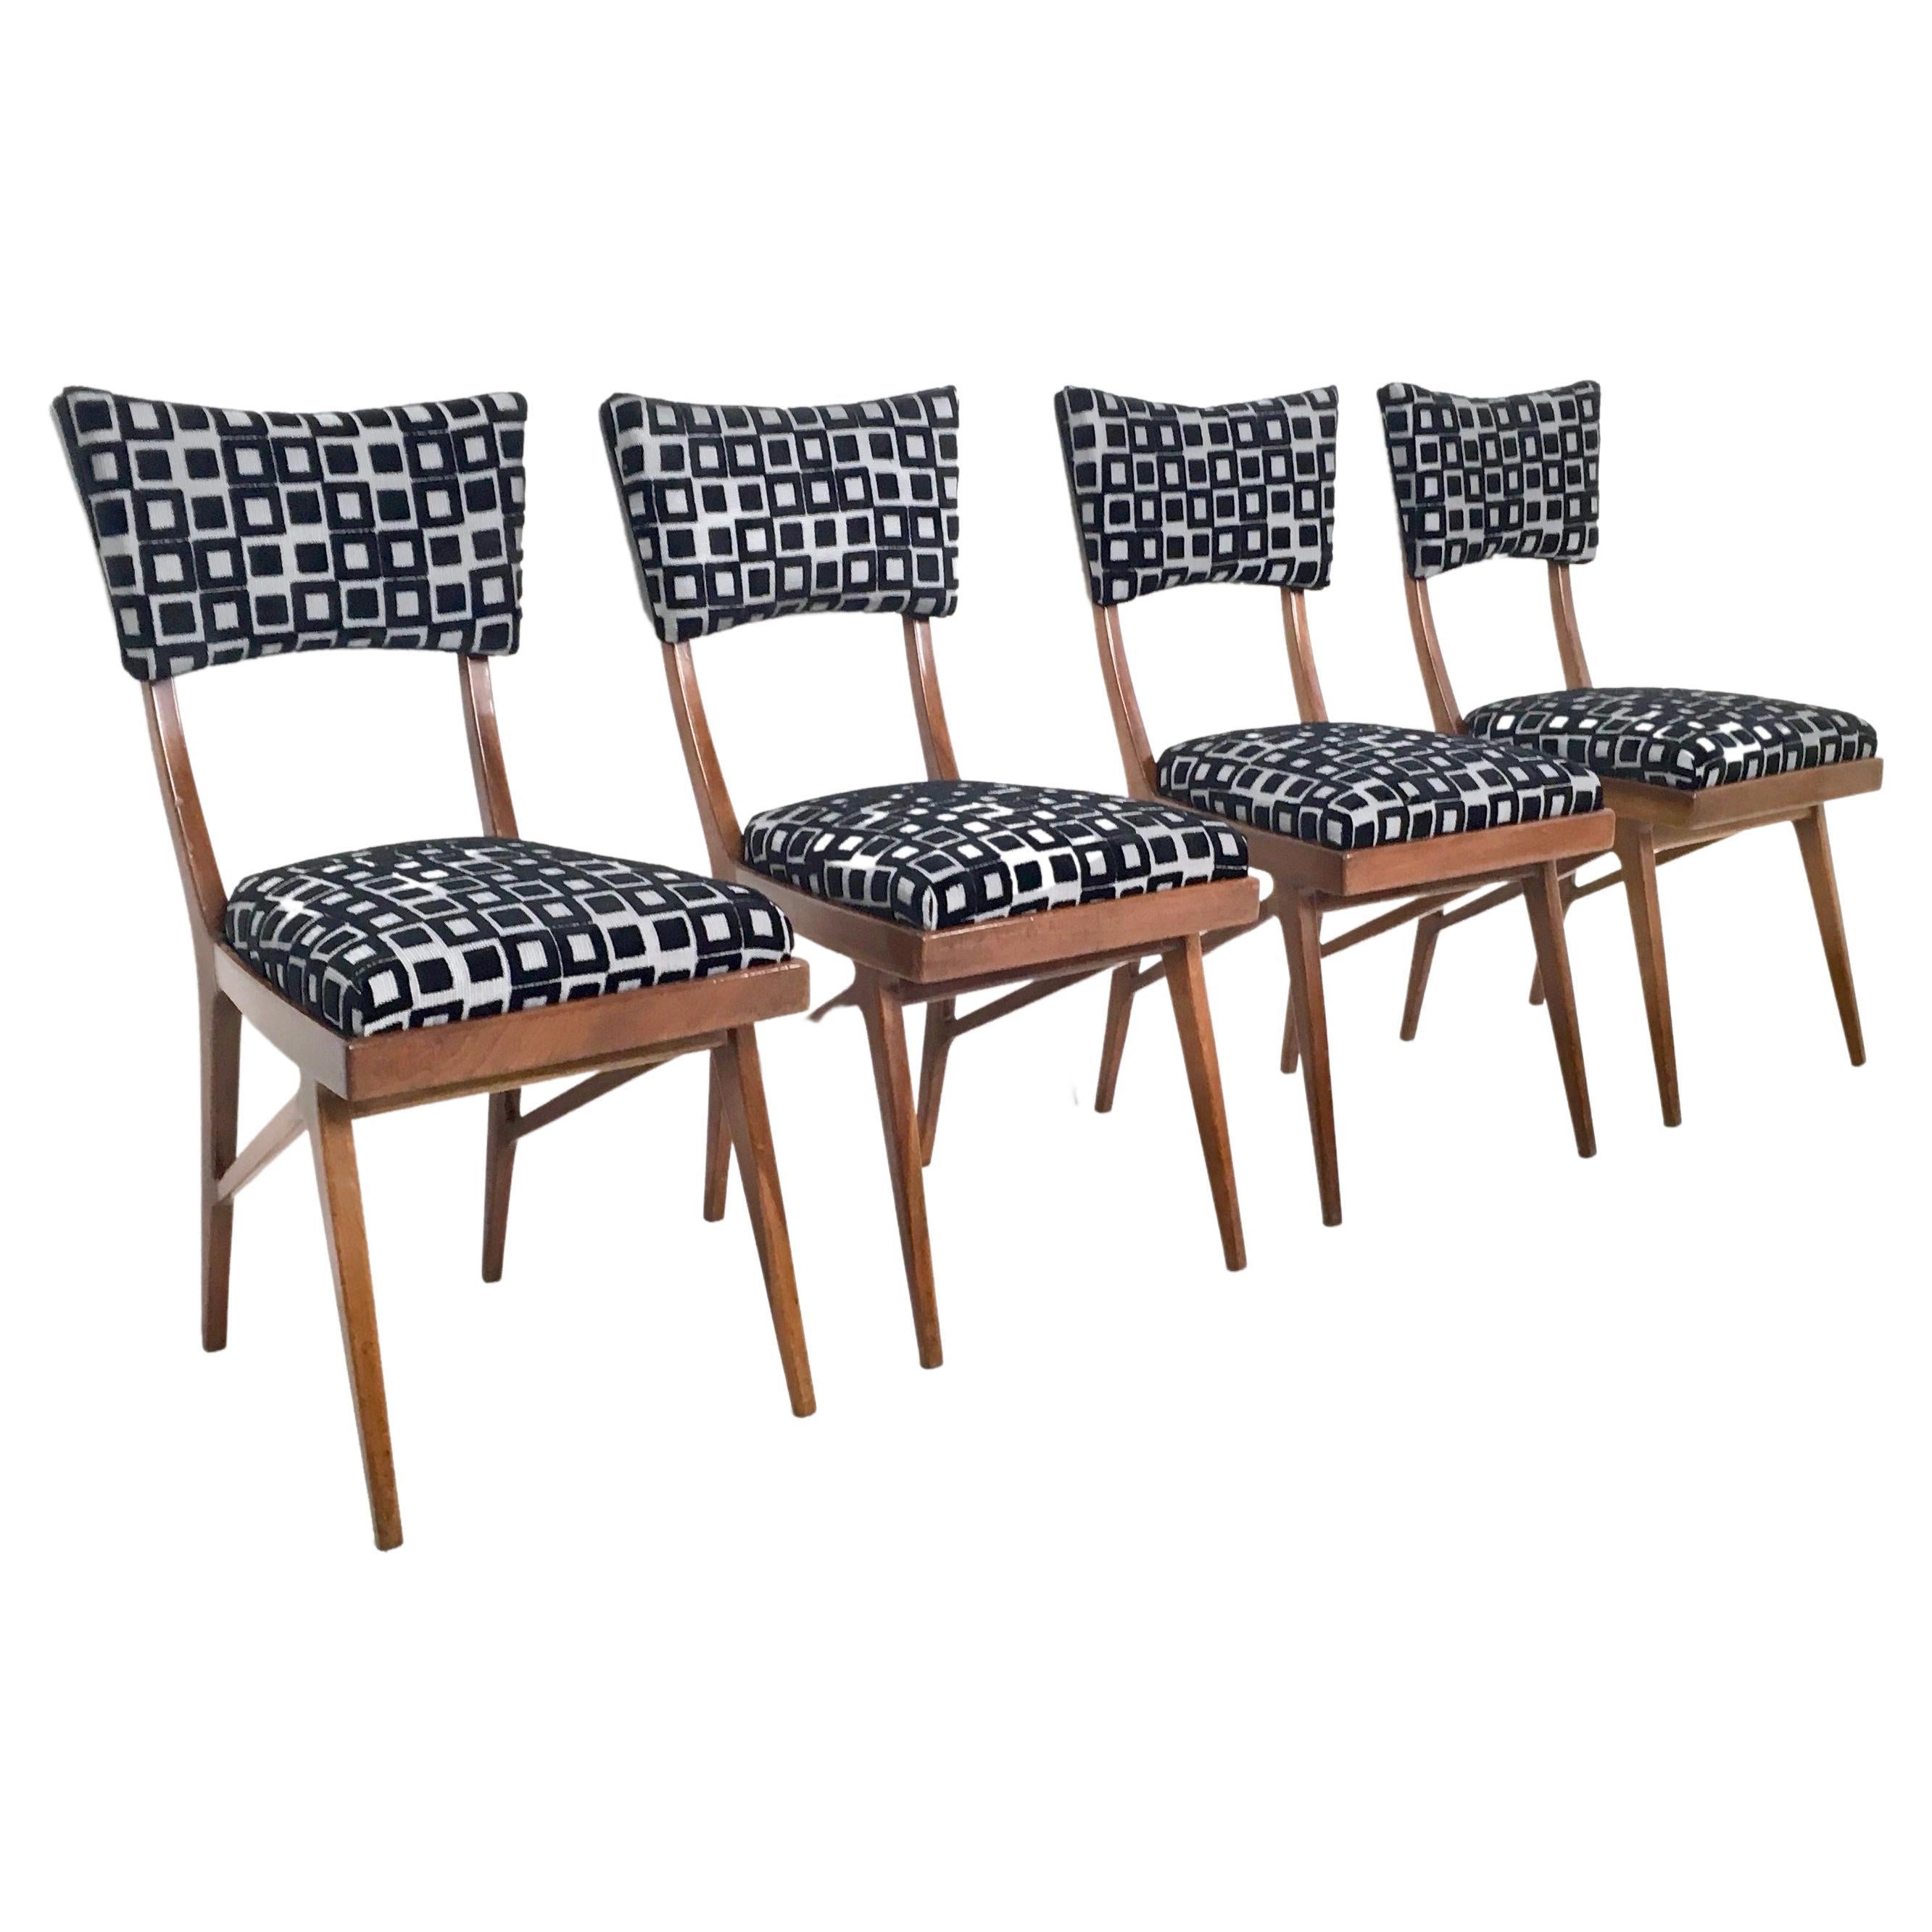 Made in Italy, 1950s.
These chairs feature a solid ebonized beech frame, which has been dyed with a mahogany effect. 
They have been recently reupholstered.
They are vintage, therefore they might show slight traces of use, but they can be